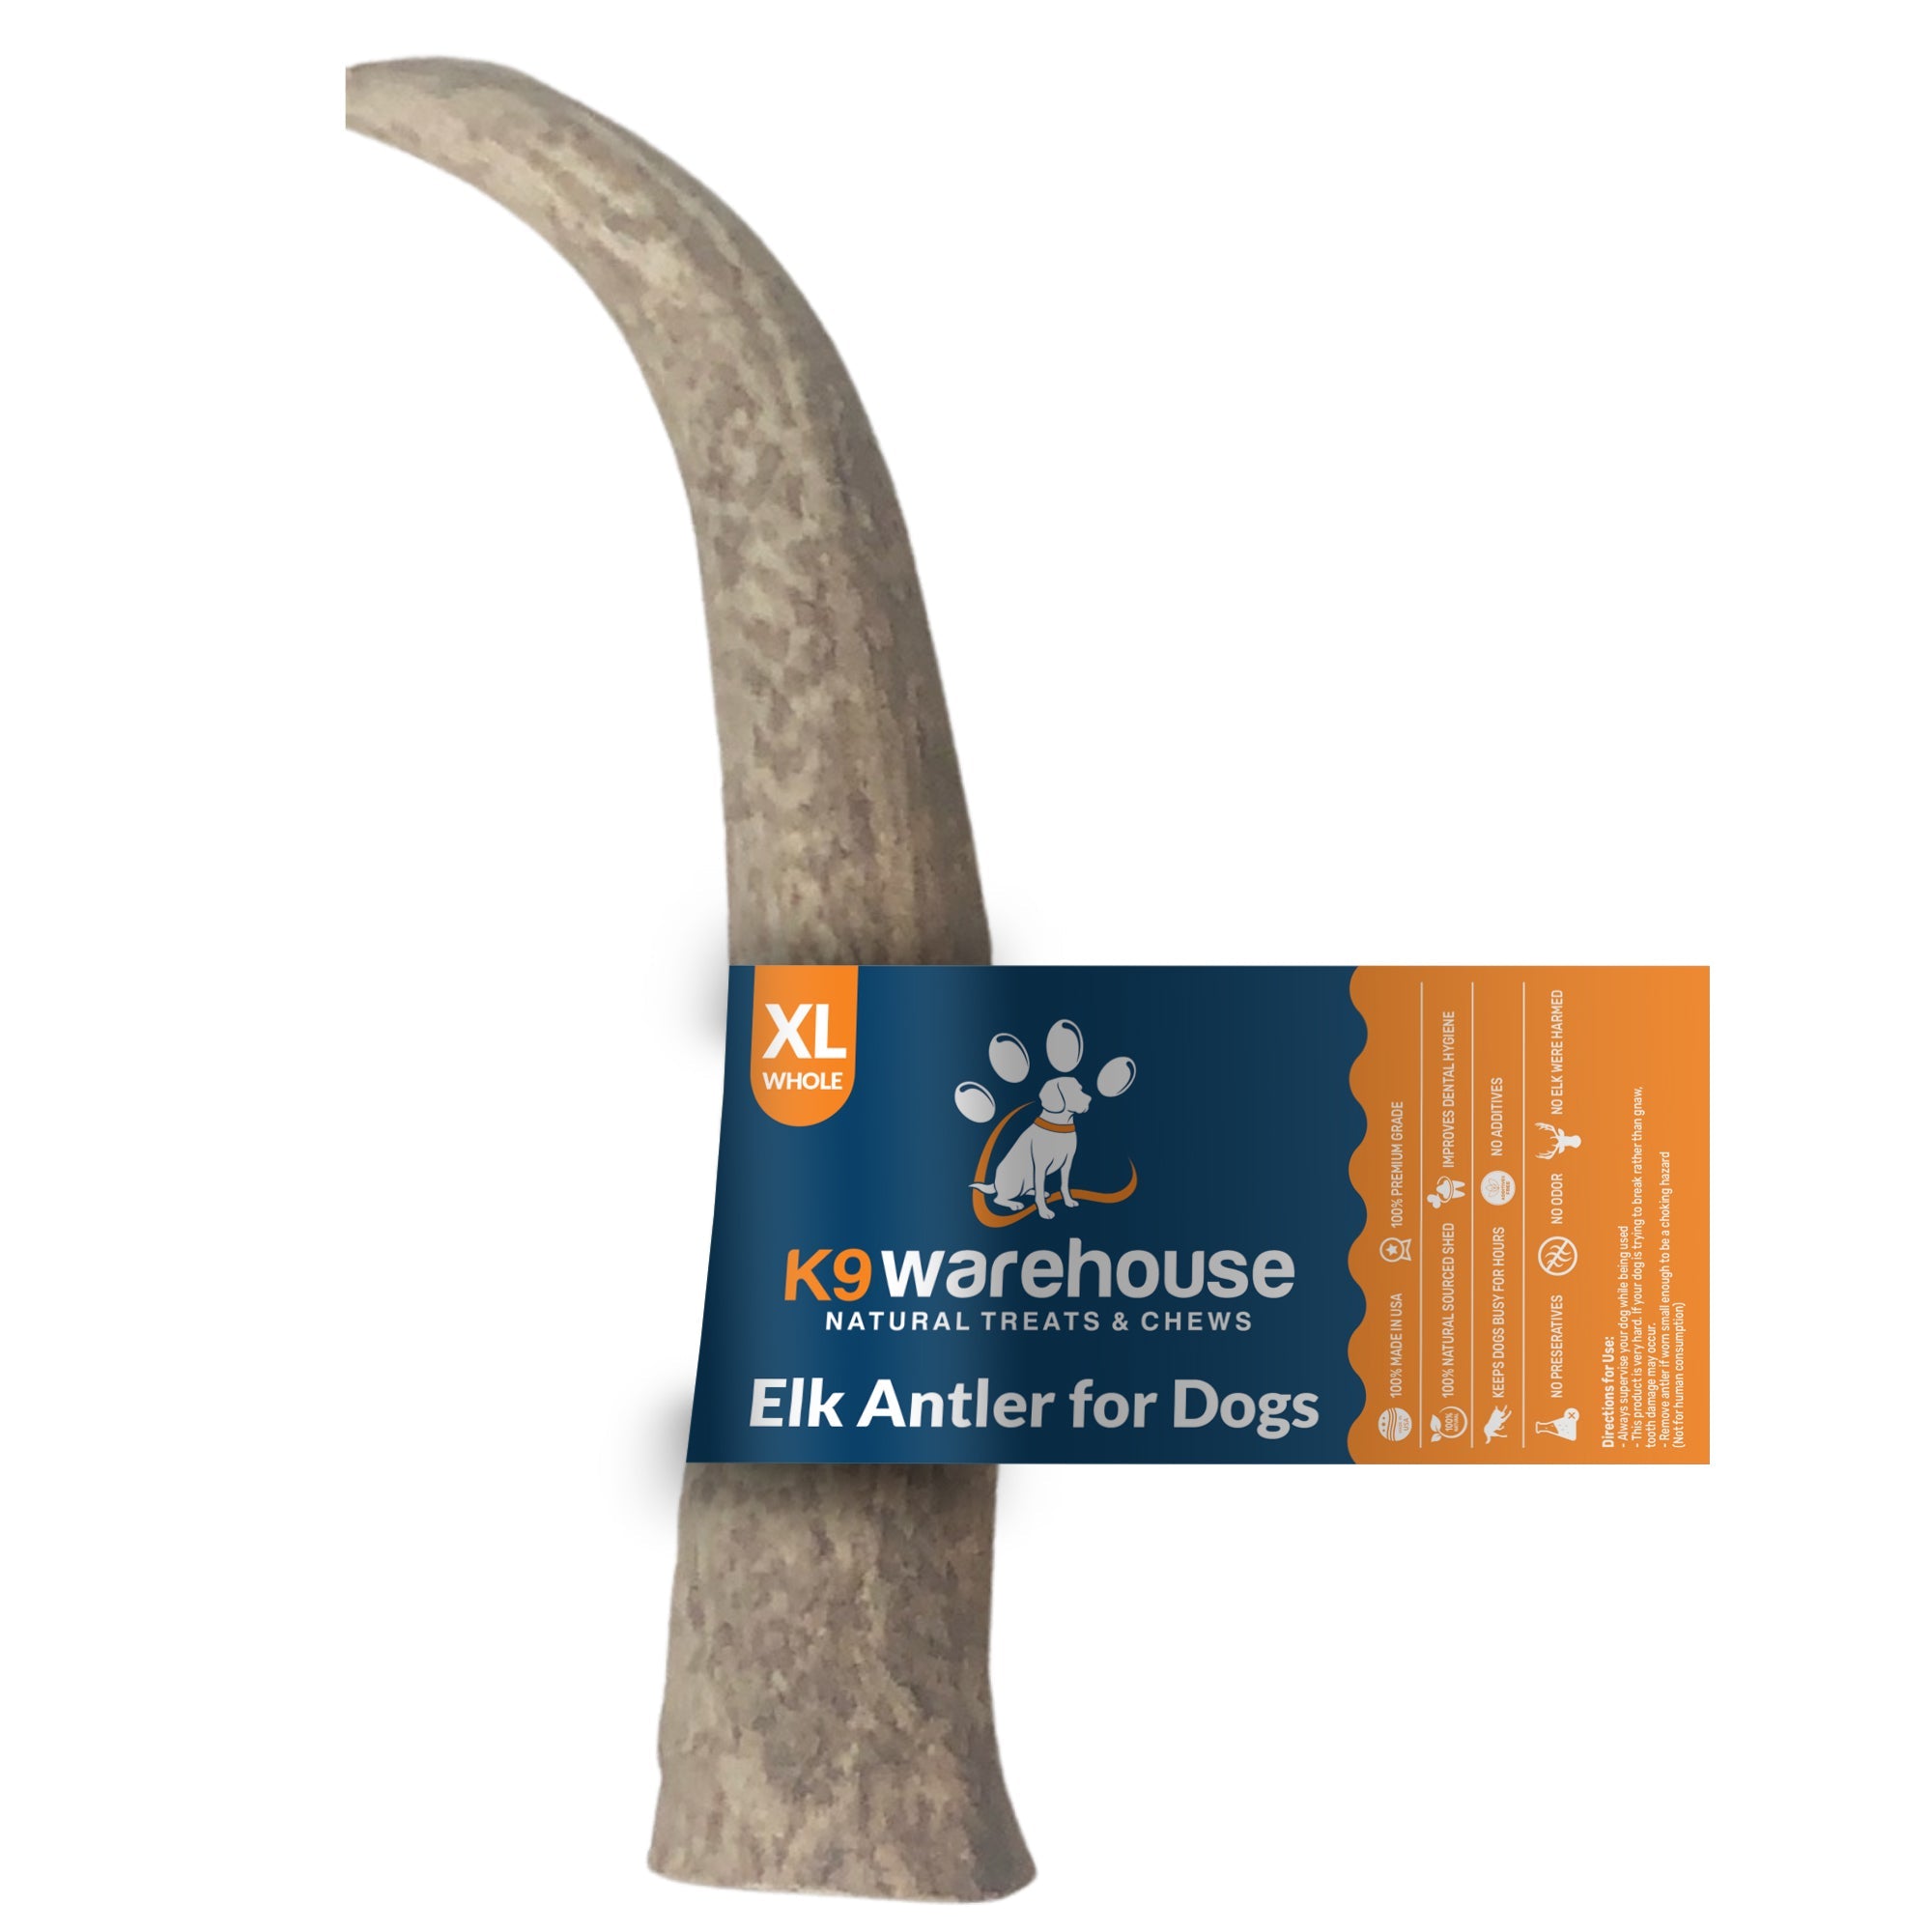 K9warehouse Elk Antlers For Dogs - Made in USA - Split and Whole - XL Whole - K9warehouse.com